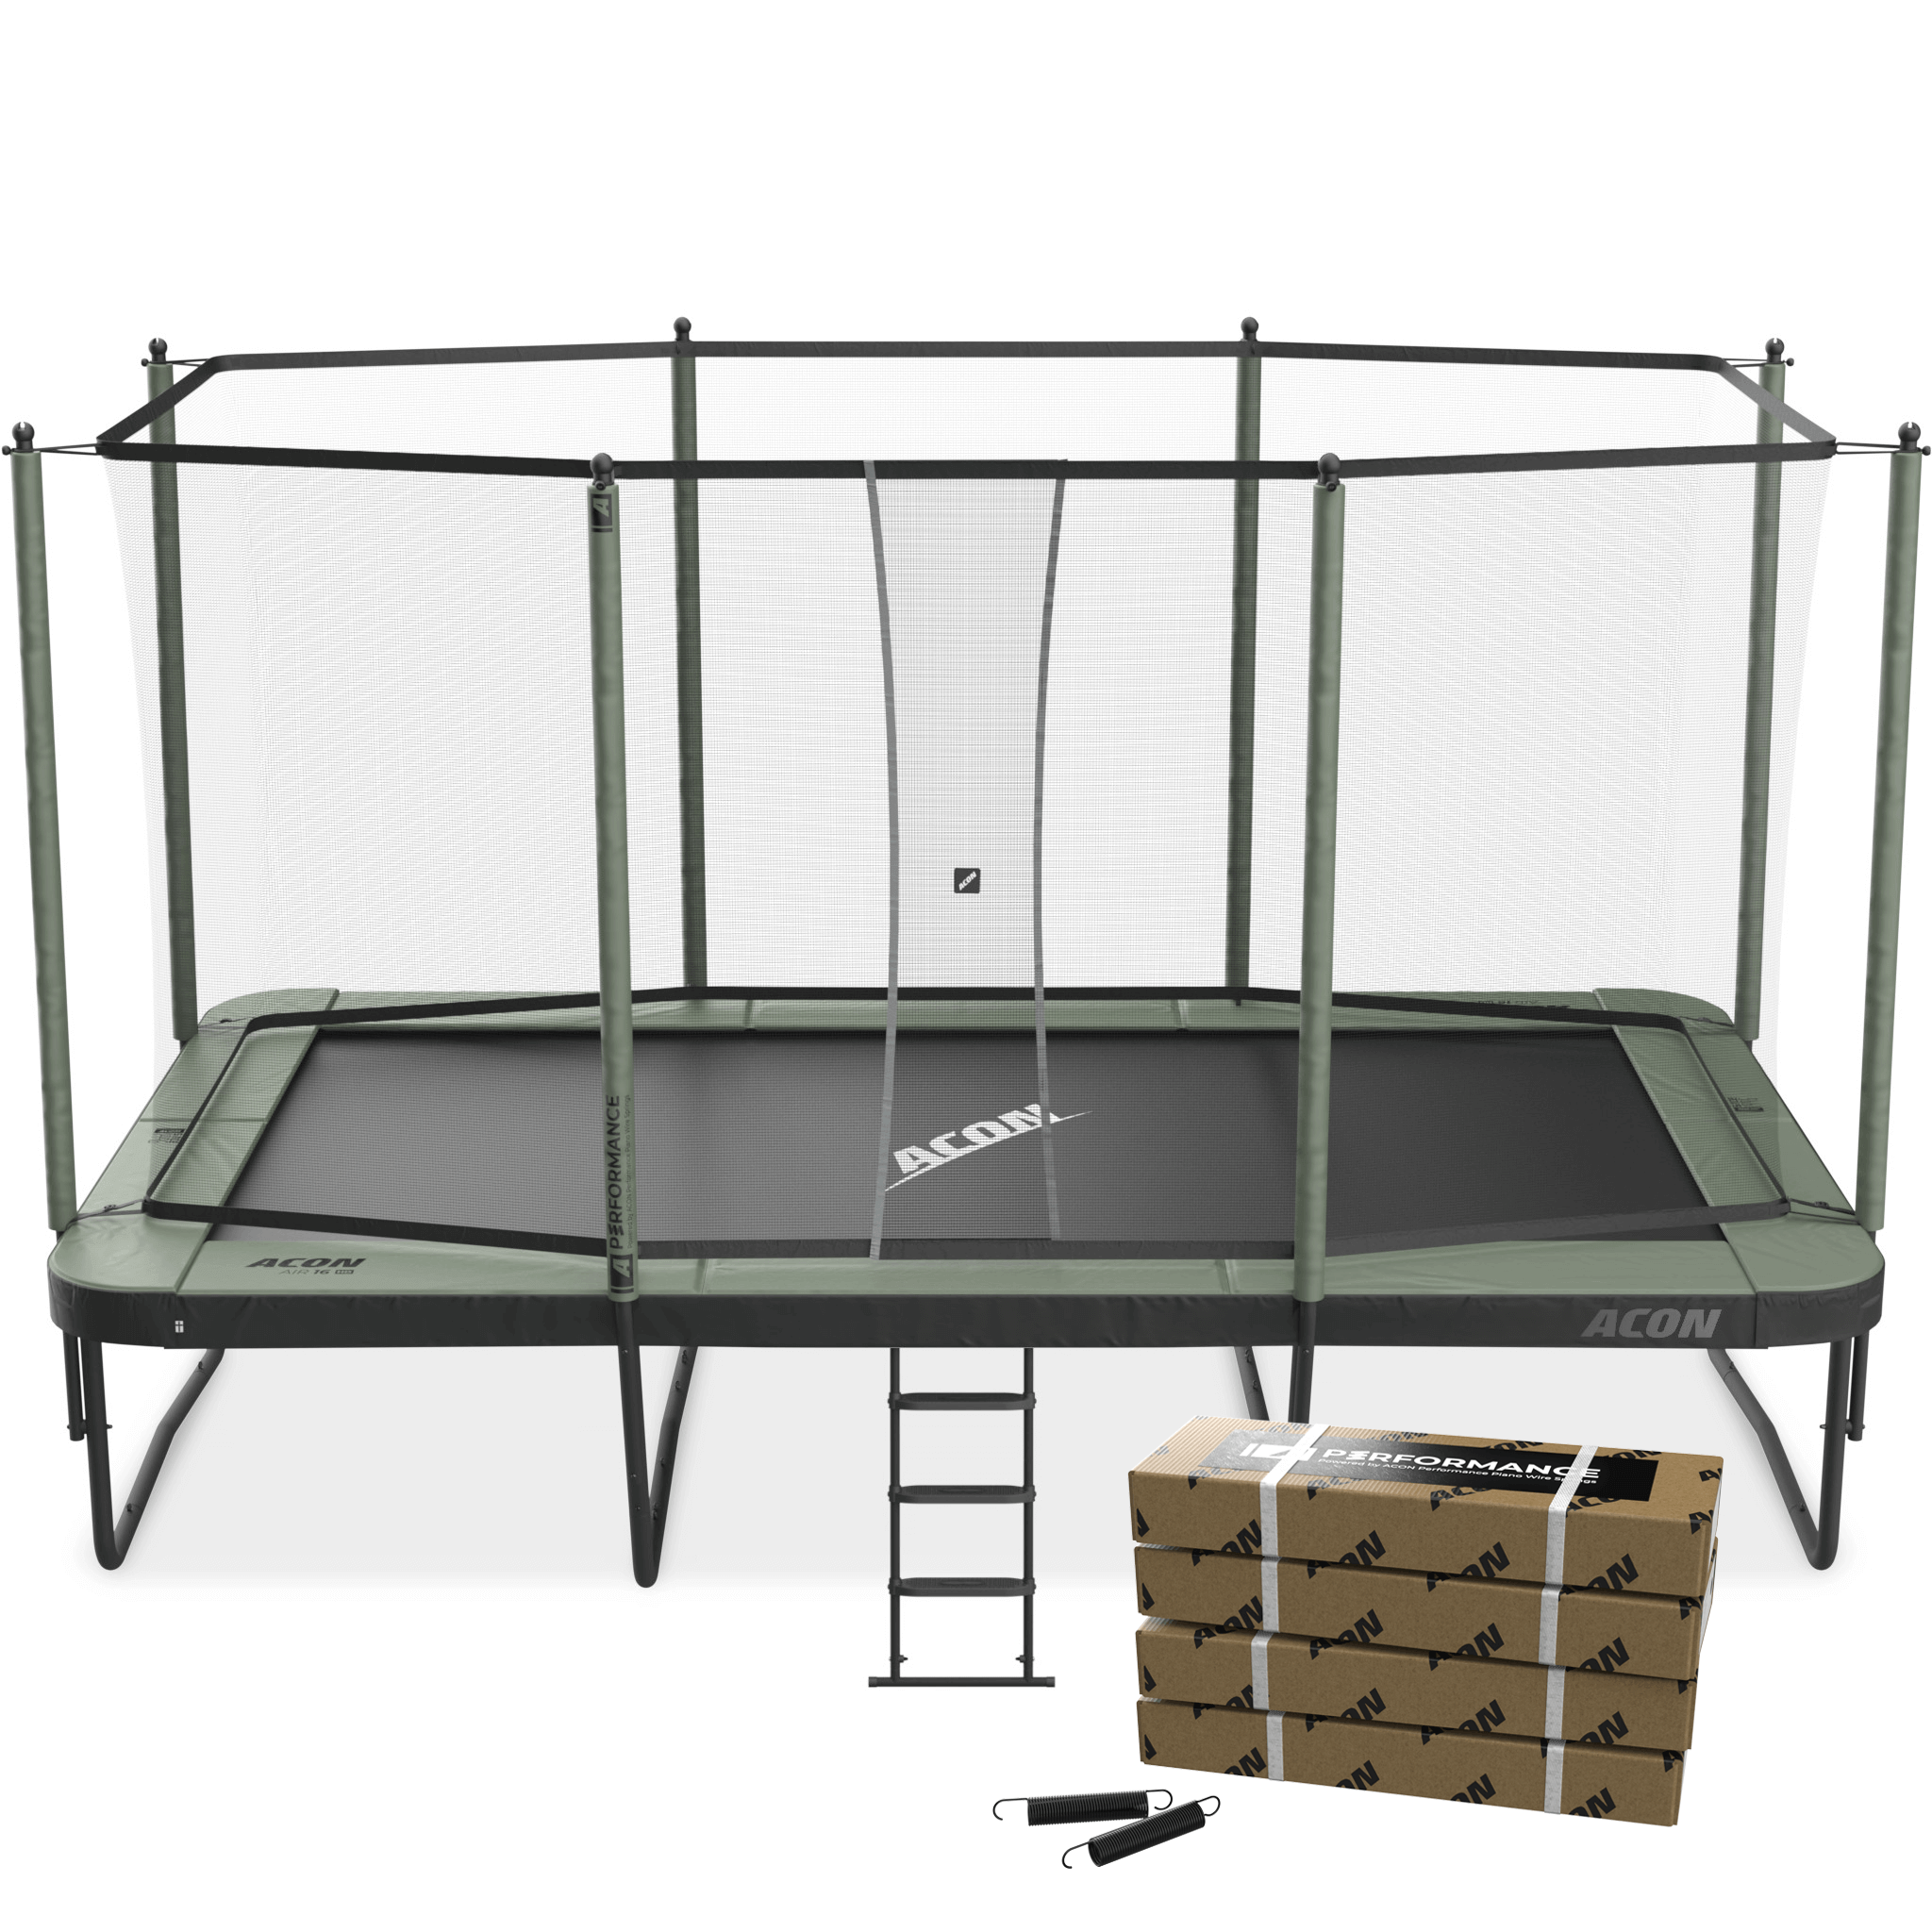 ACON Air 16 HD Performance Trampoline with Safety Net, ladder and Performance Springs.